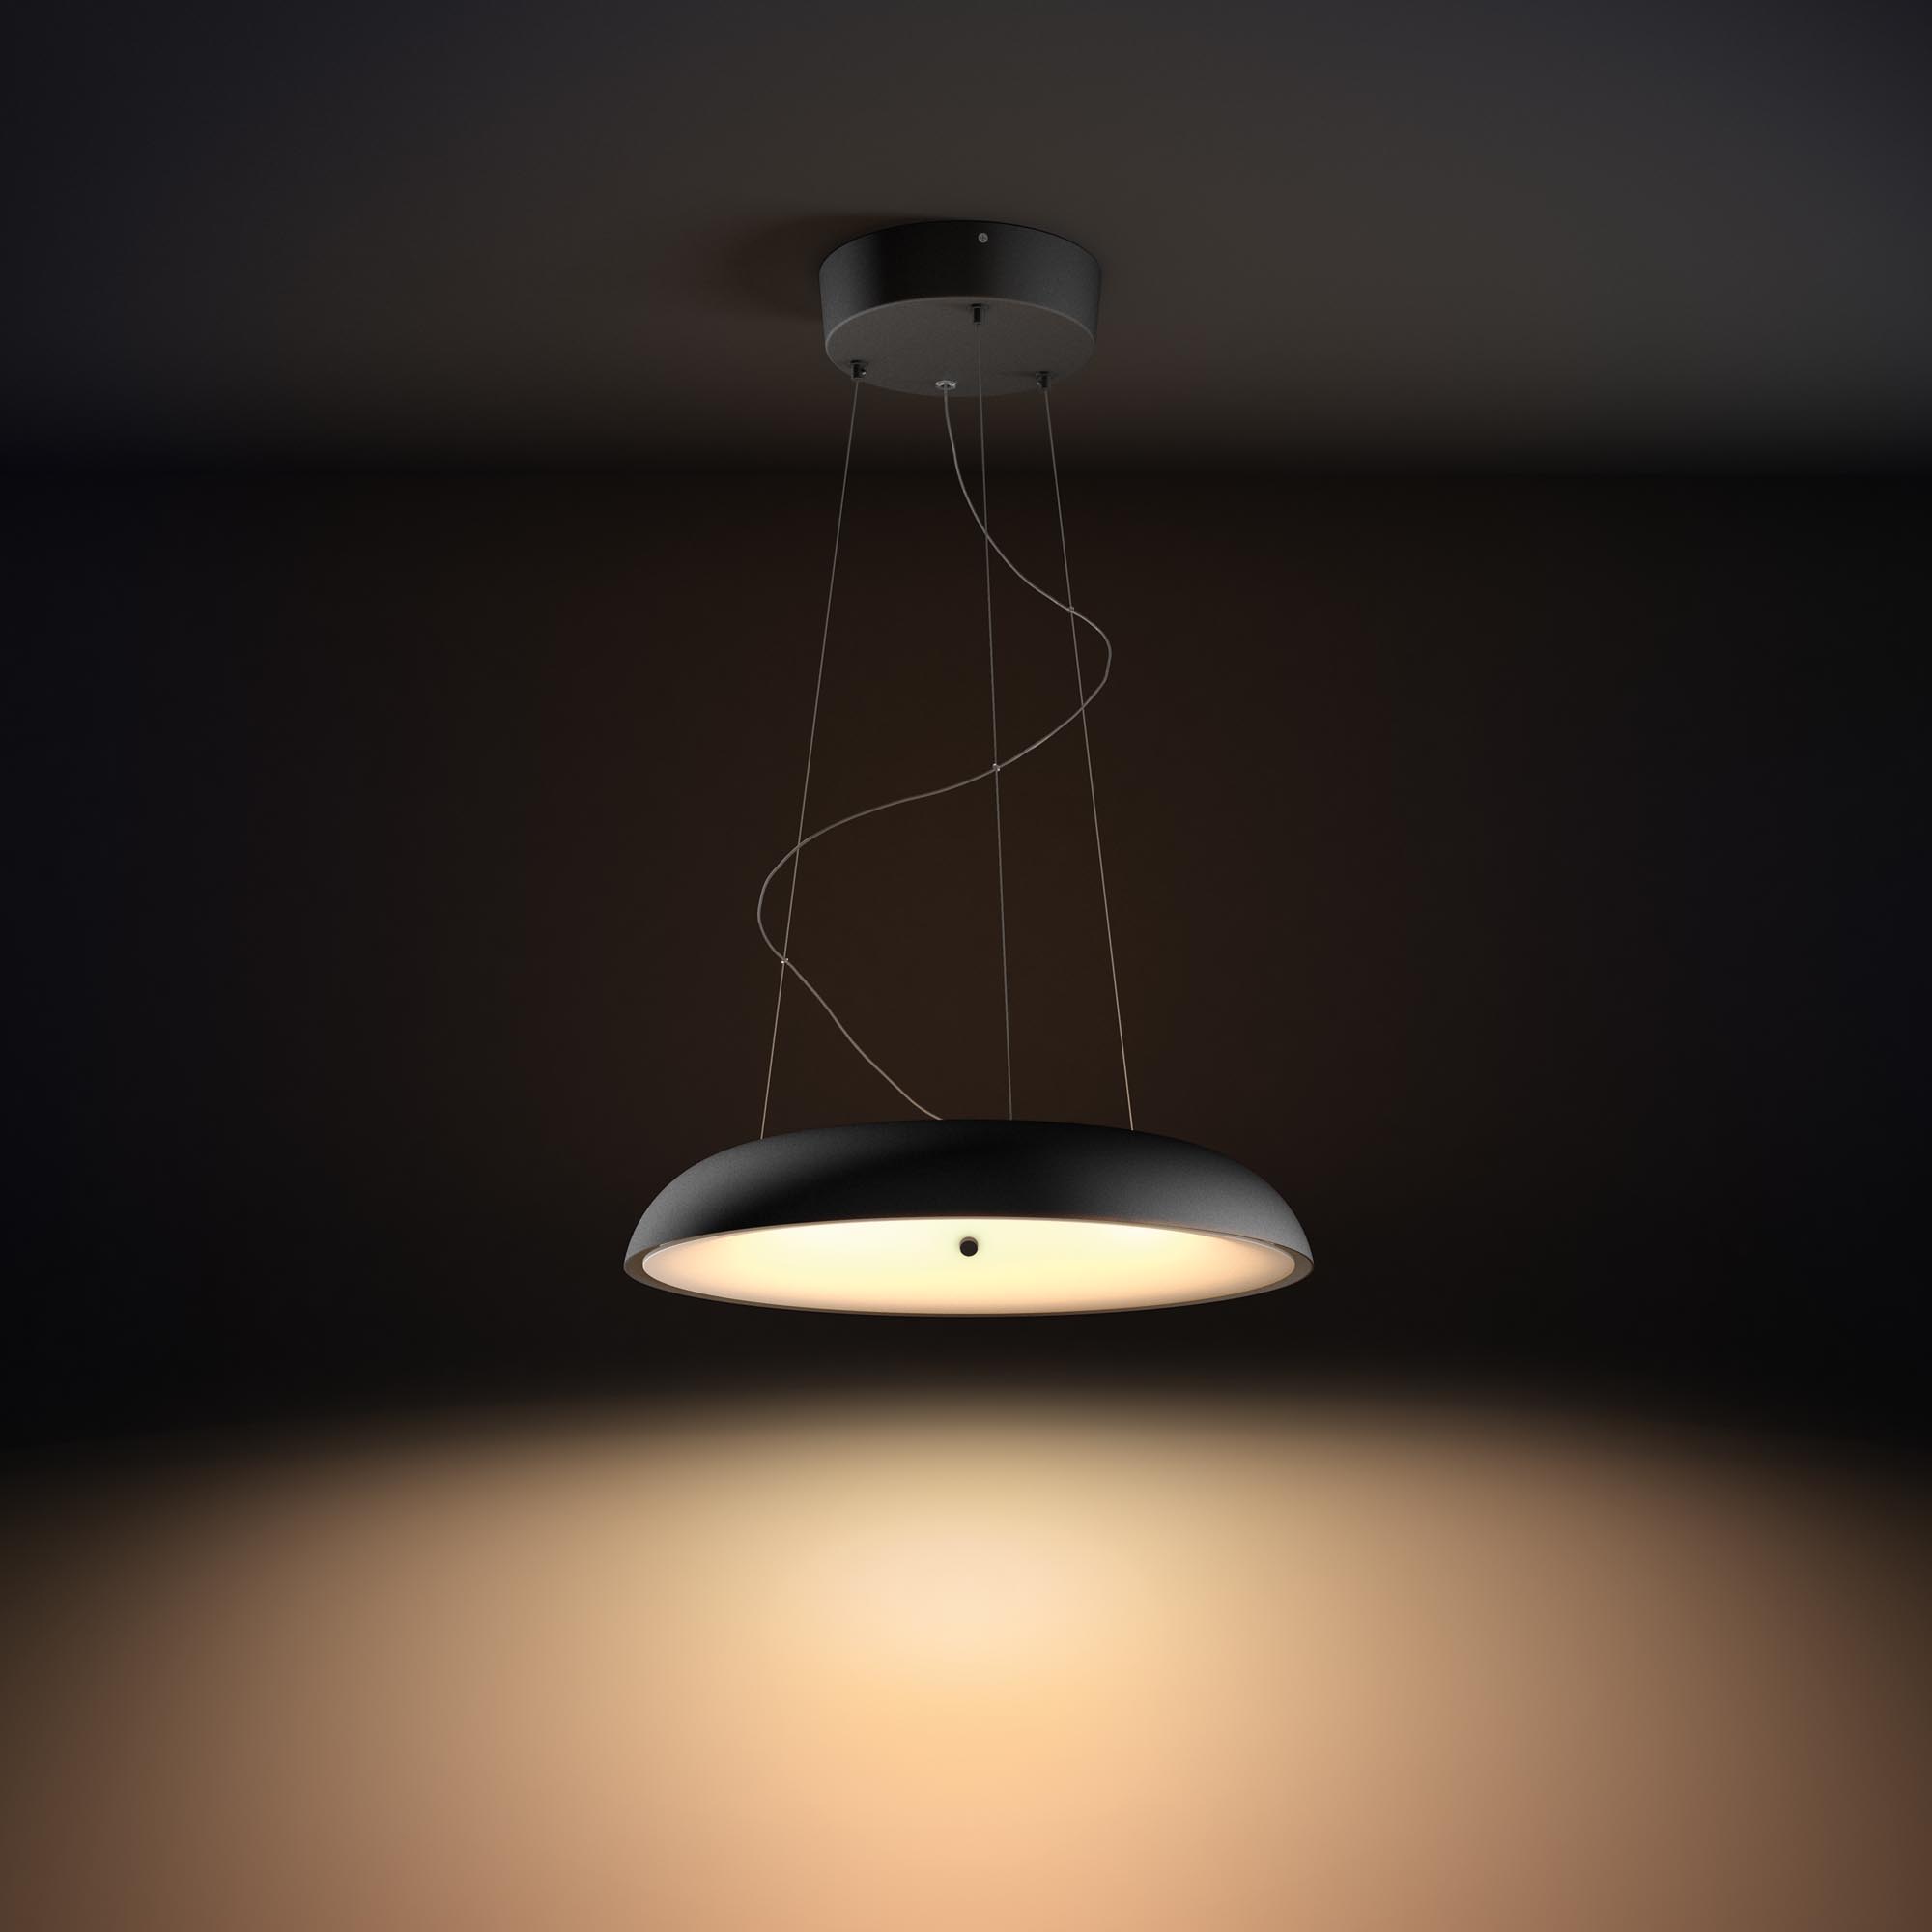 Philips Hue White Ambiance Amaze LED Pendant Light black 2900lm incl. Dimmer Switch